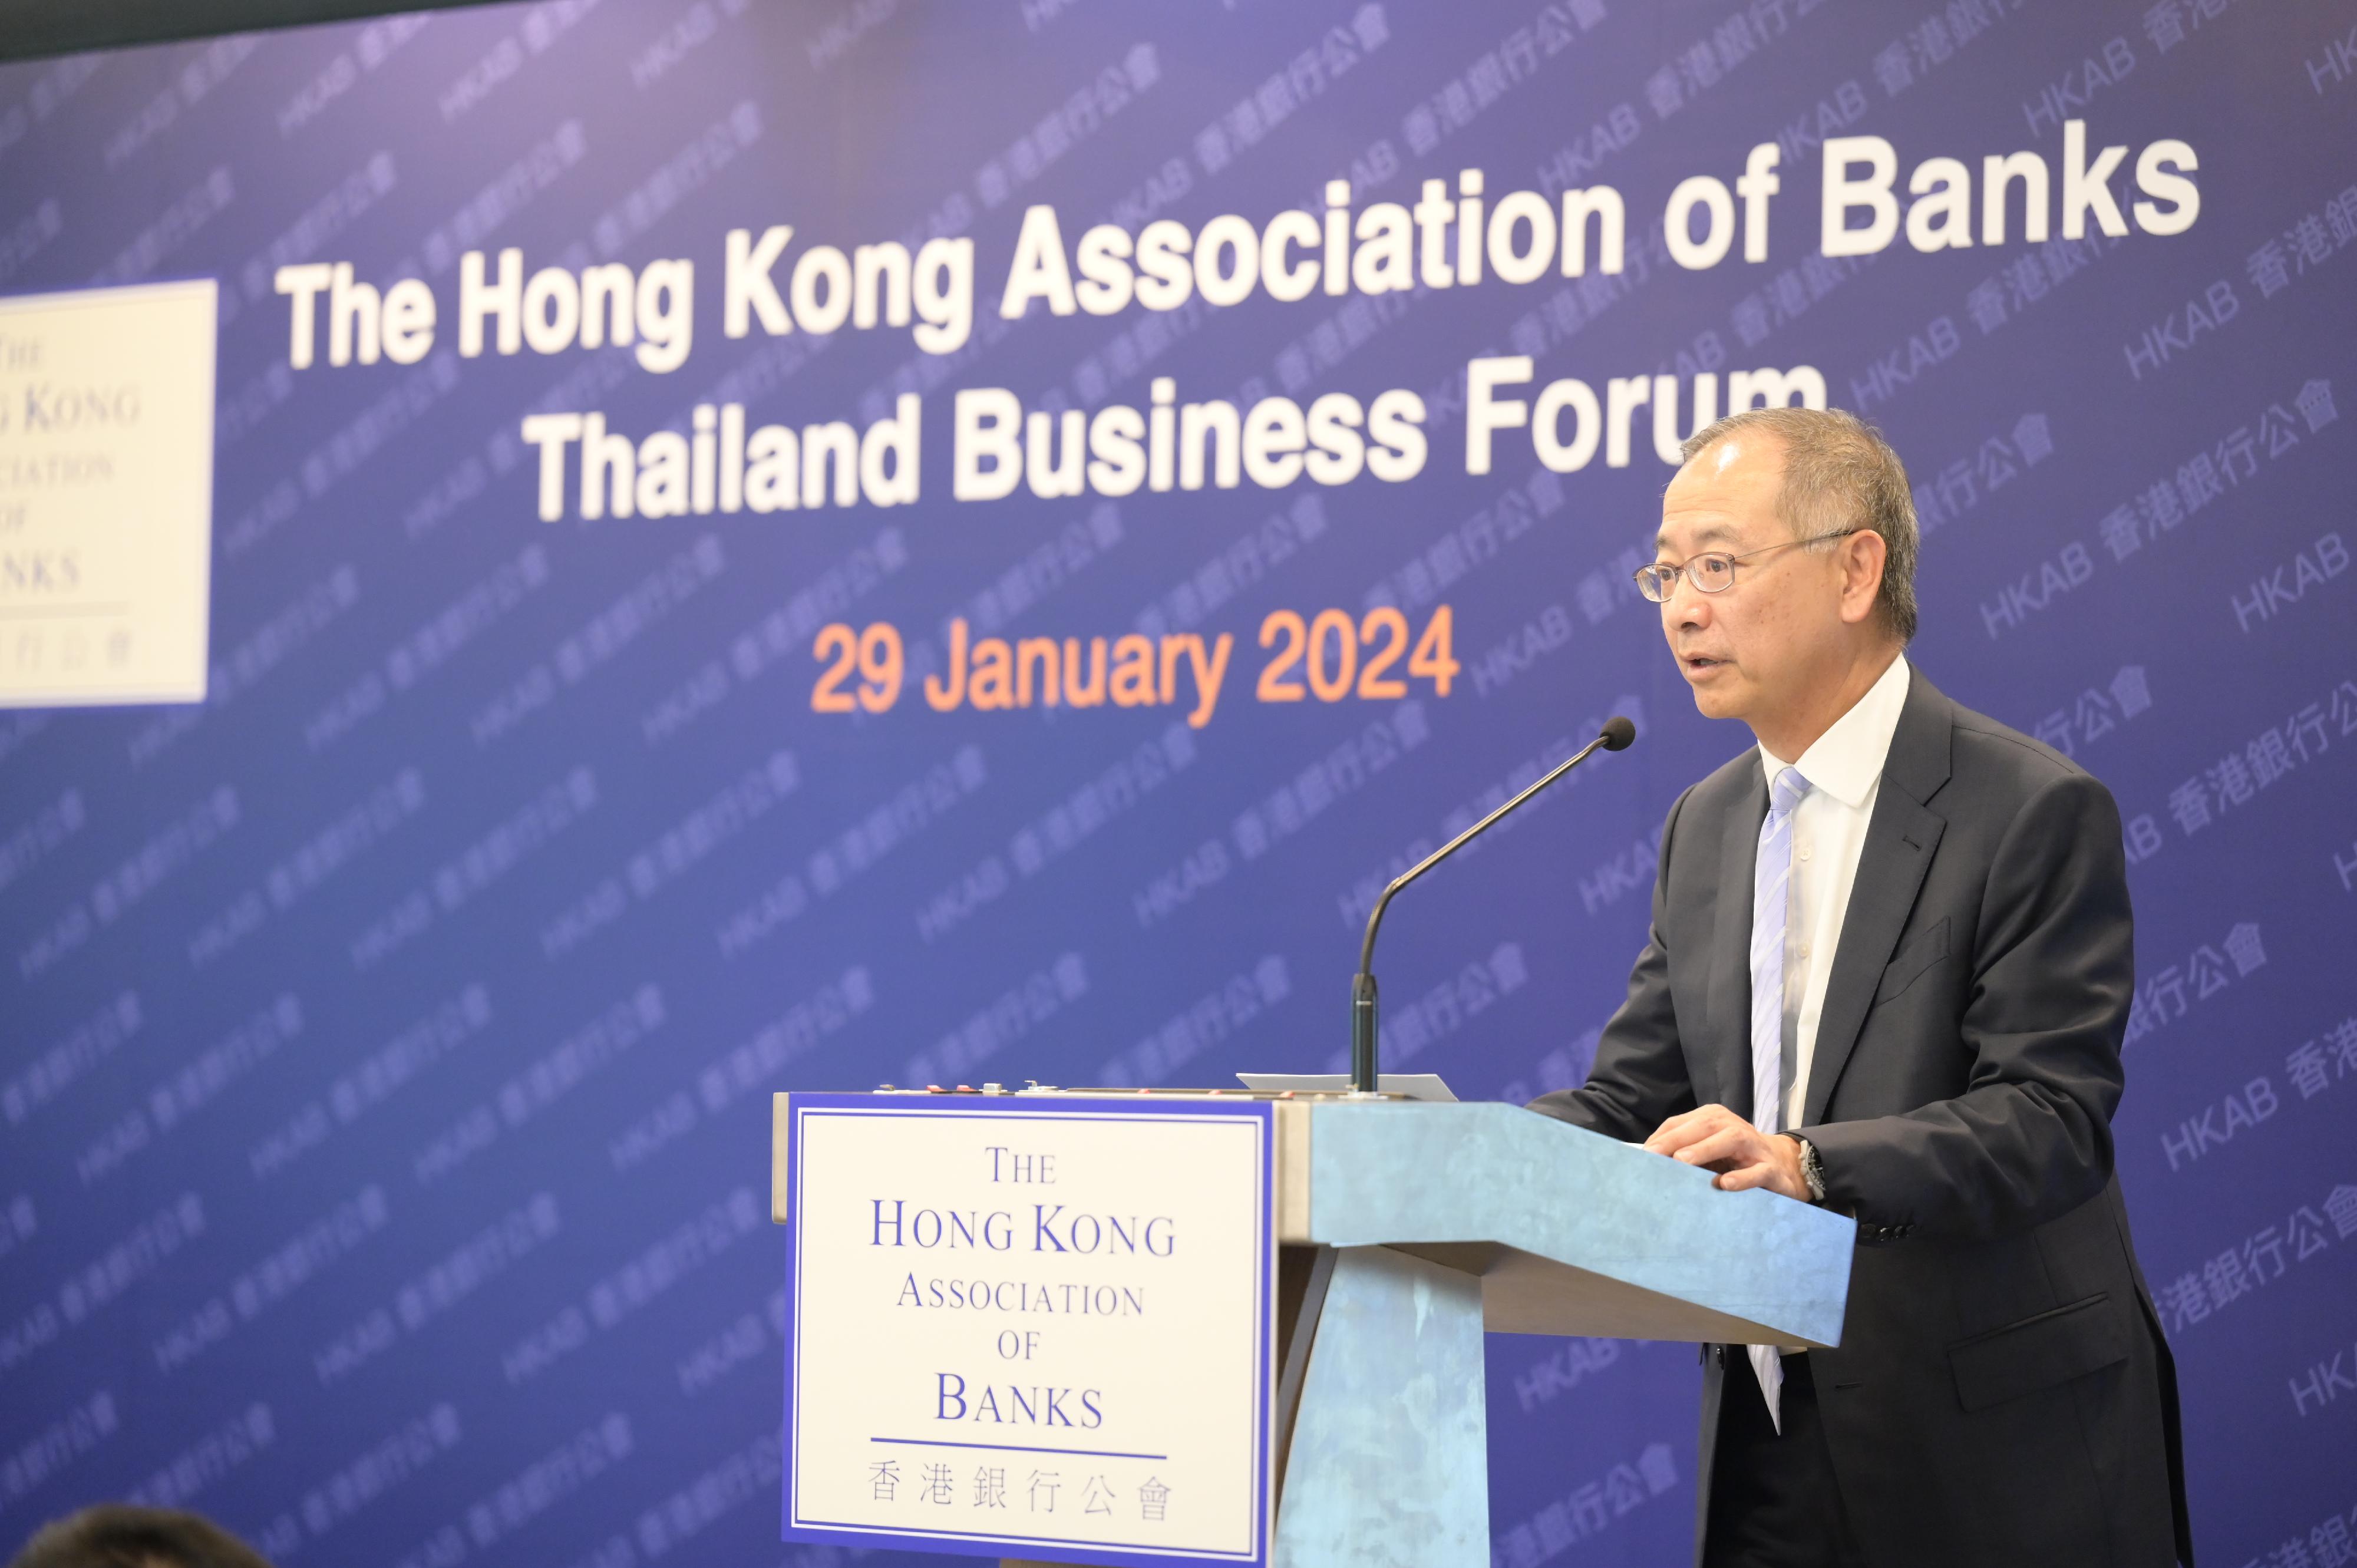 The Chief Executive of the Hong Kong Monetary Authority, Mr Eddie Yue, delivers a keynote speech at the Thailand Business Forum in Bangkok on January 29.